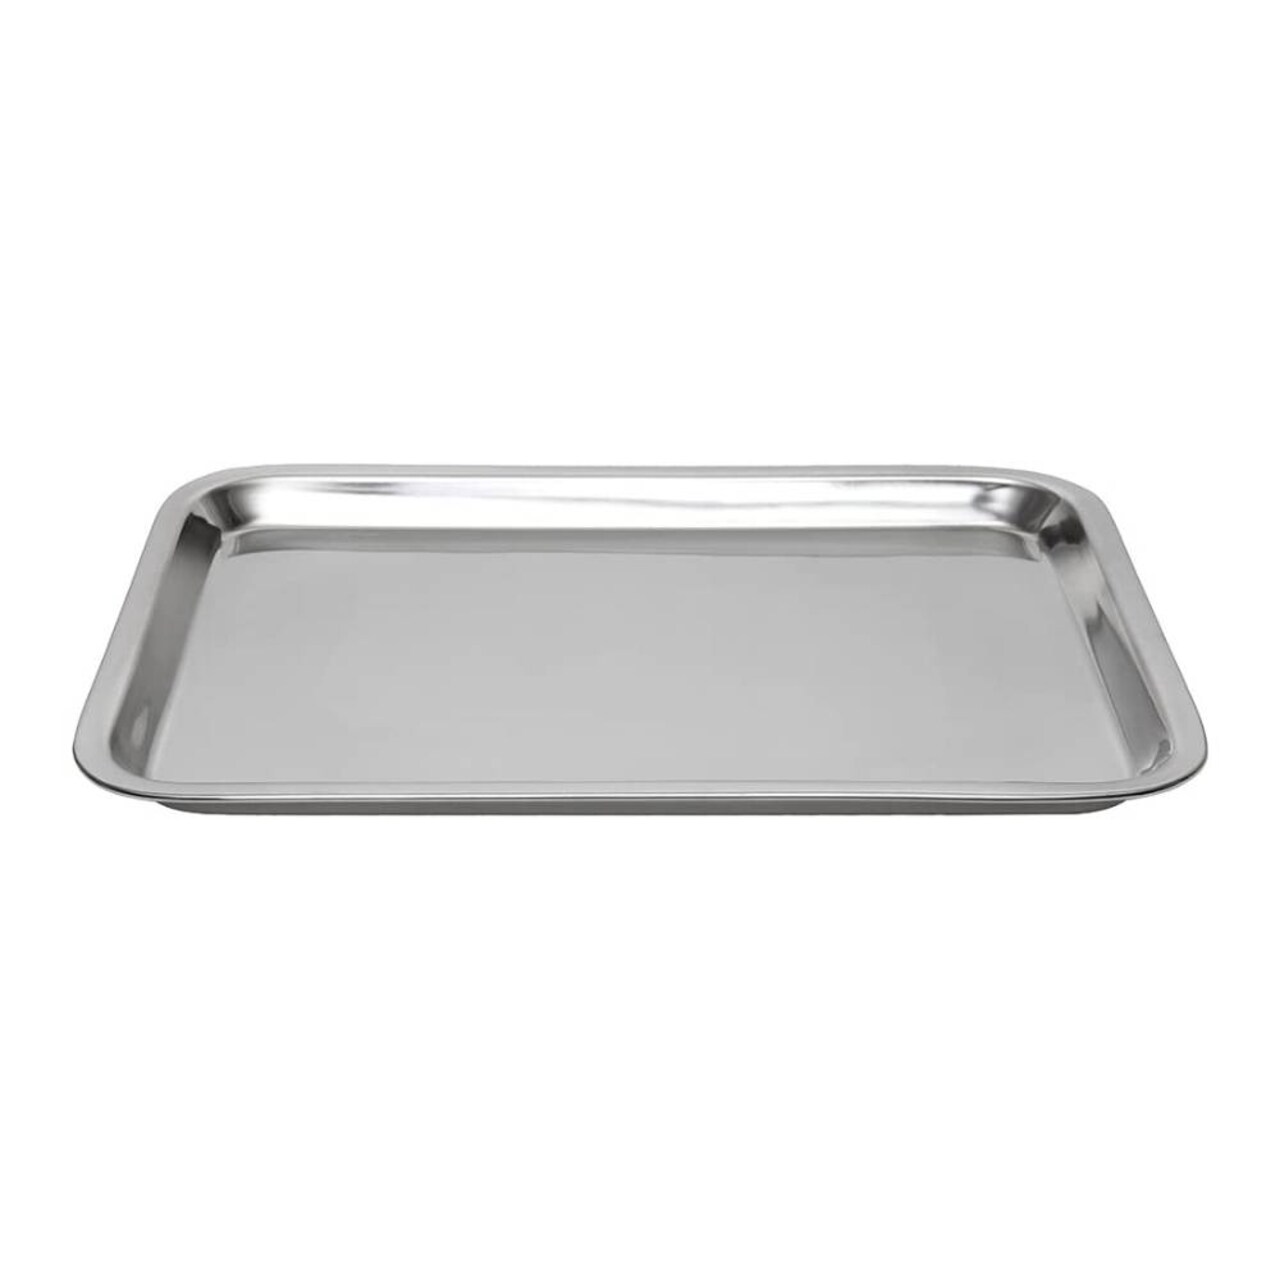 Stainless Steel Cookie Sheet Pan Serving Tray 6.75 x 12.125 in